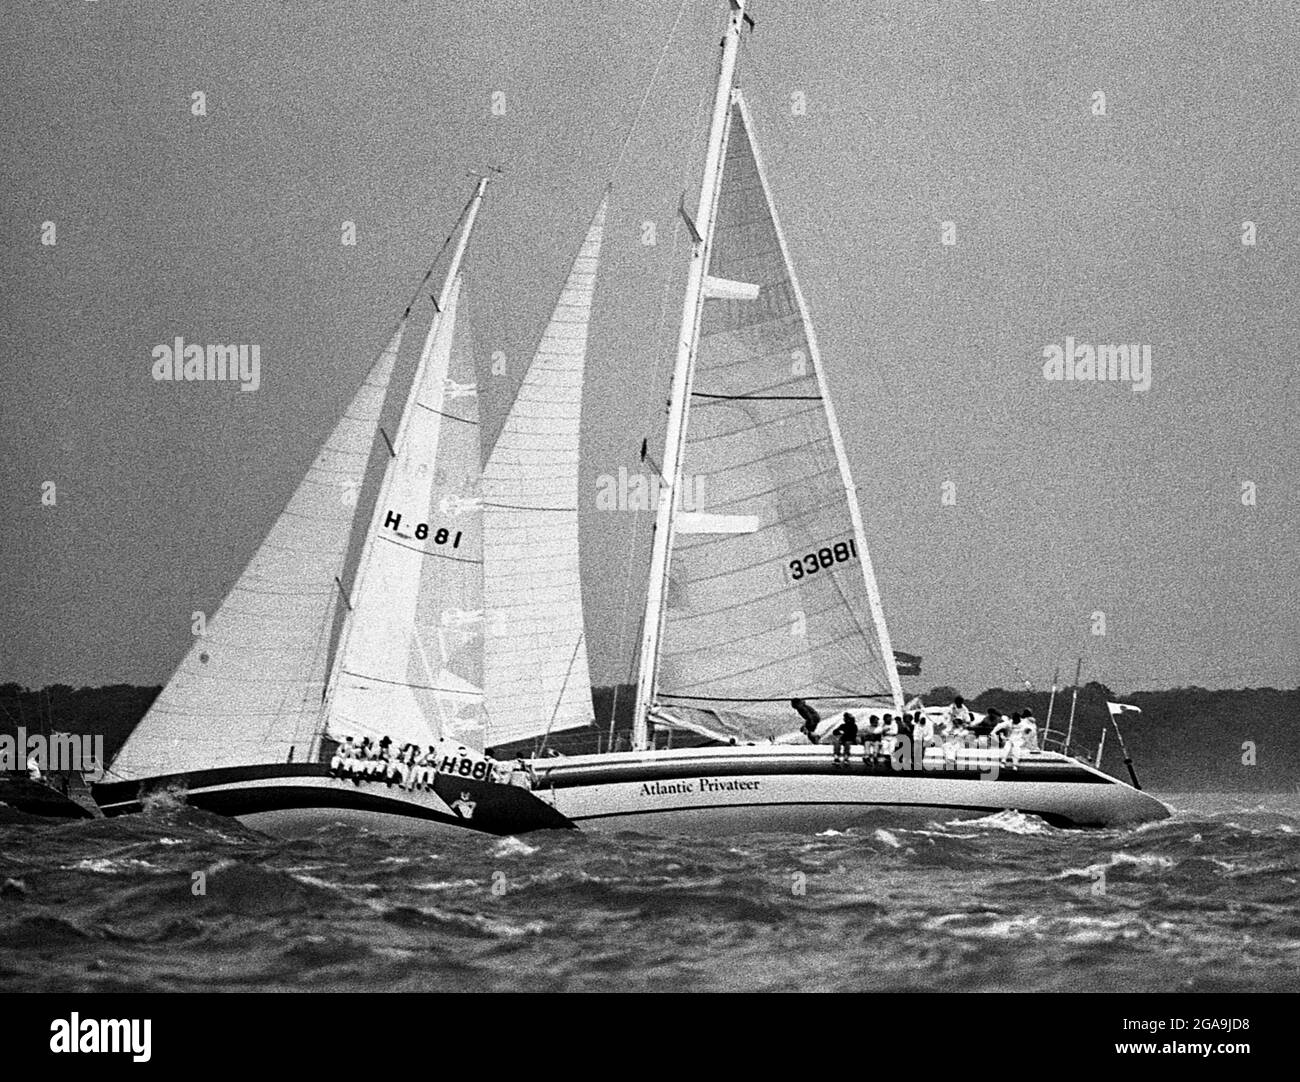 AJAXNETPHOTO. 1985. SOLENT, ENGLAND. - CHANNEL RACE START - SOUTH AFRICAN MAXI YACHT ATLANTIC PRIVATEER IN ROUGH WEATHER AT THE START. YACHT IS WHITBREAD WORLD RACE ENTRY. PHOTO:JONATHAN EASTLAND/AJAX REF:CHR85 6A 20 Stock Photo